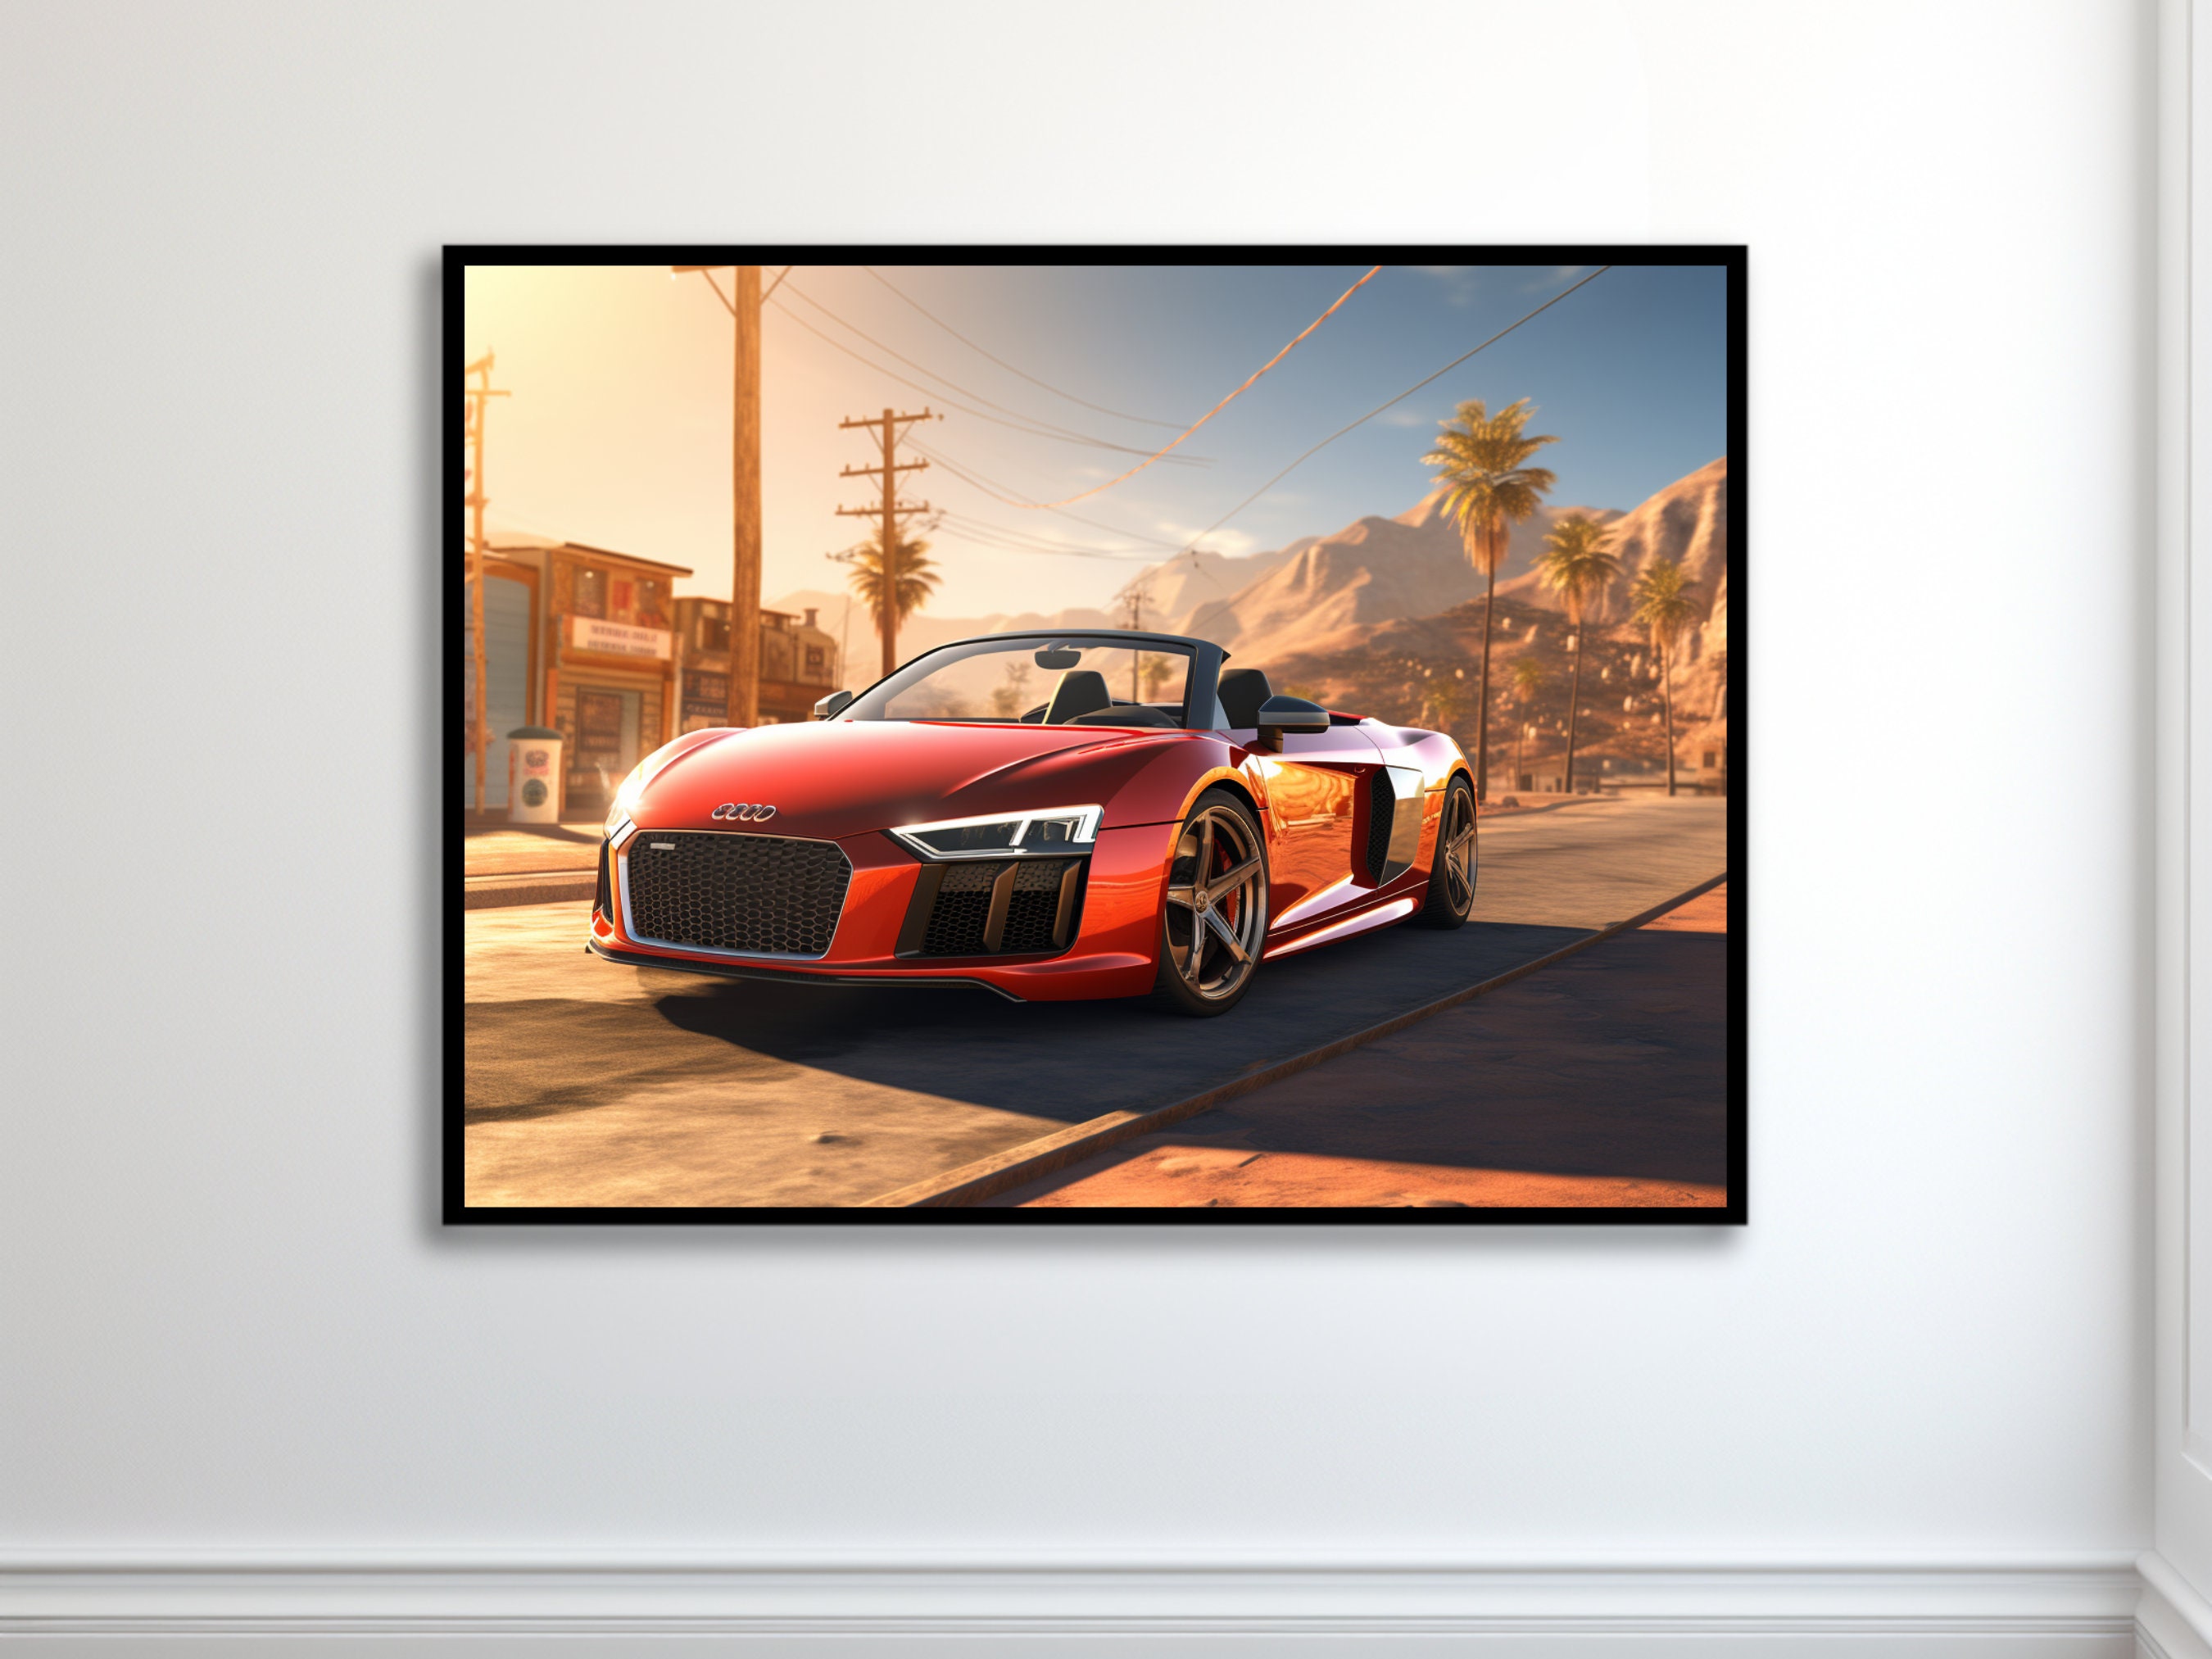 Poster Audi R8 Coupe 4.2 V8 2006 by Interlakes